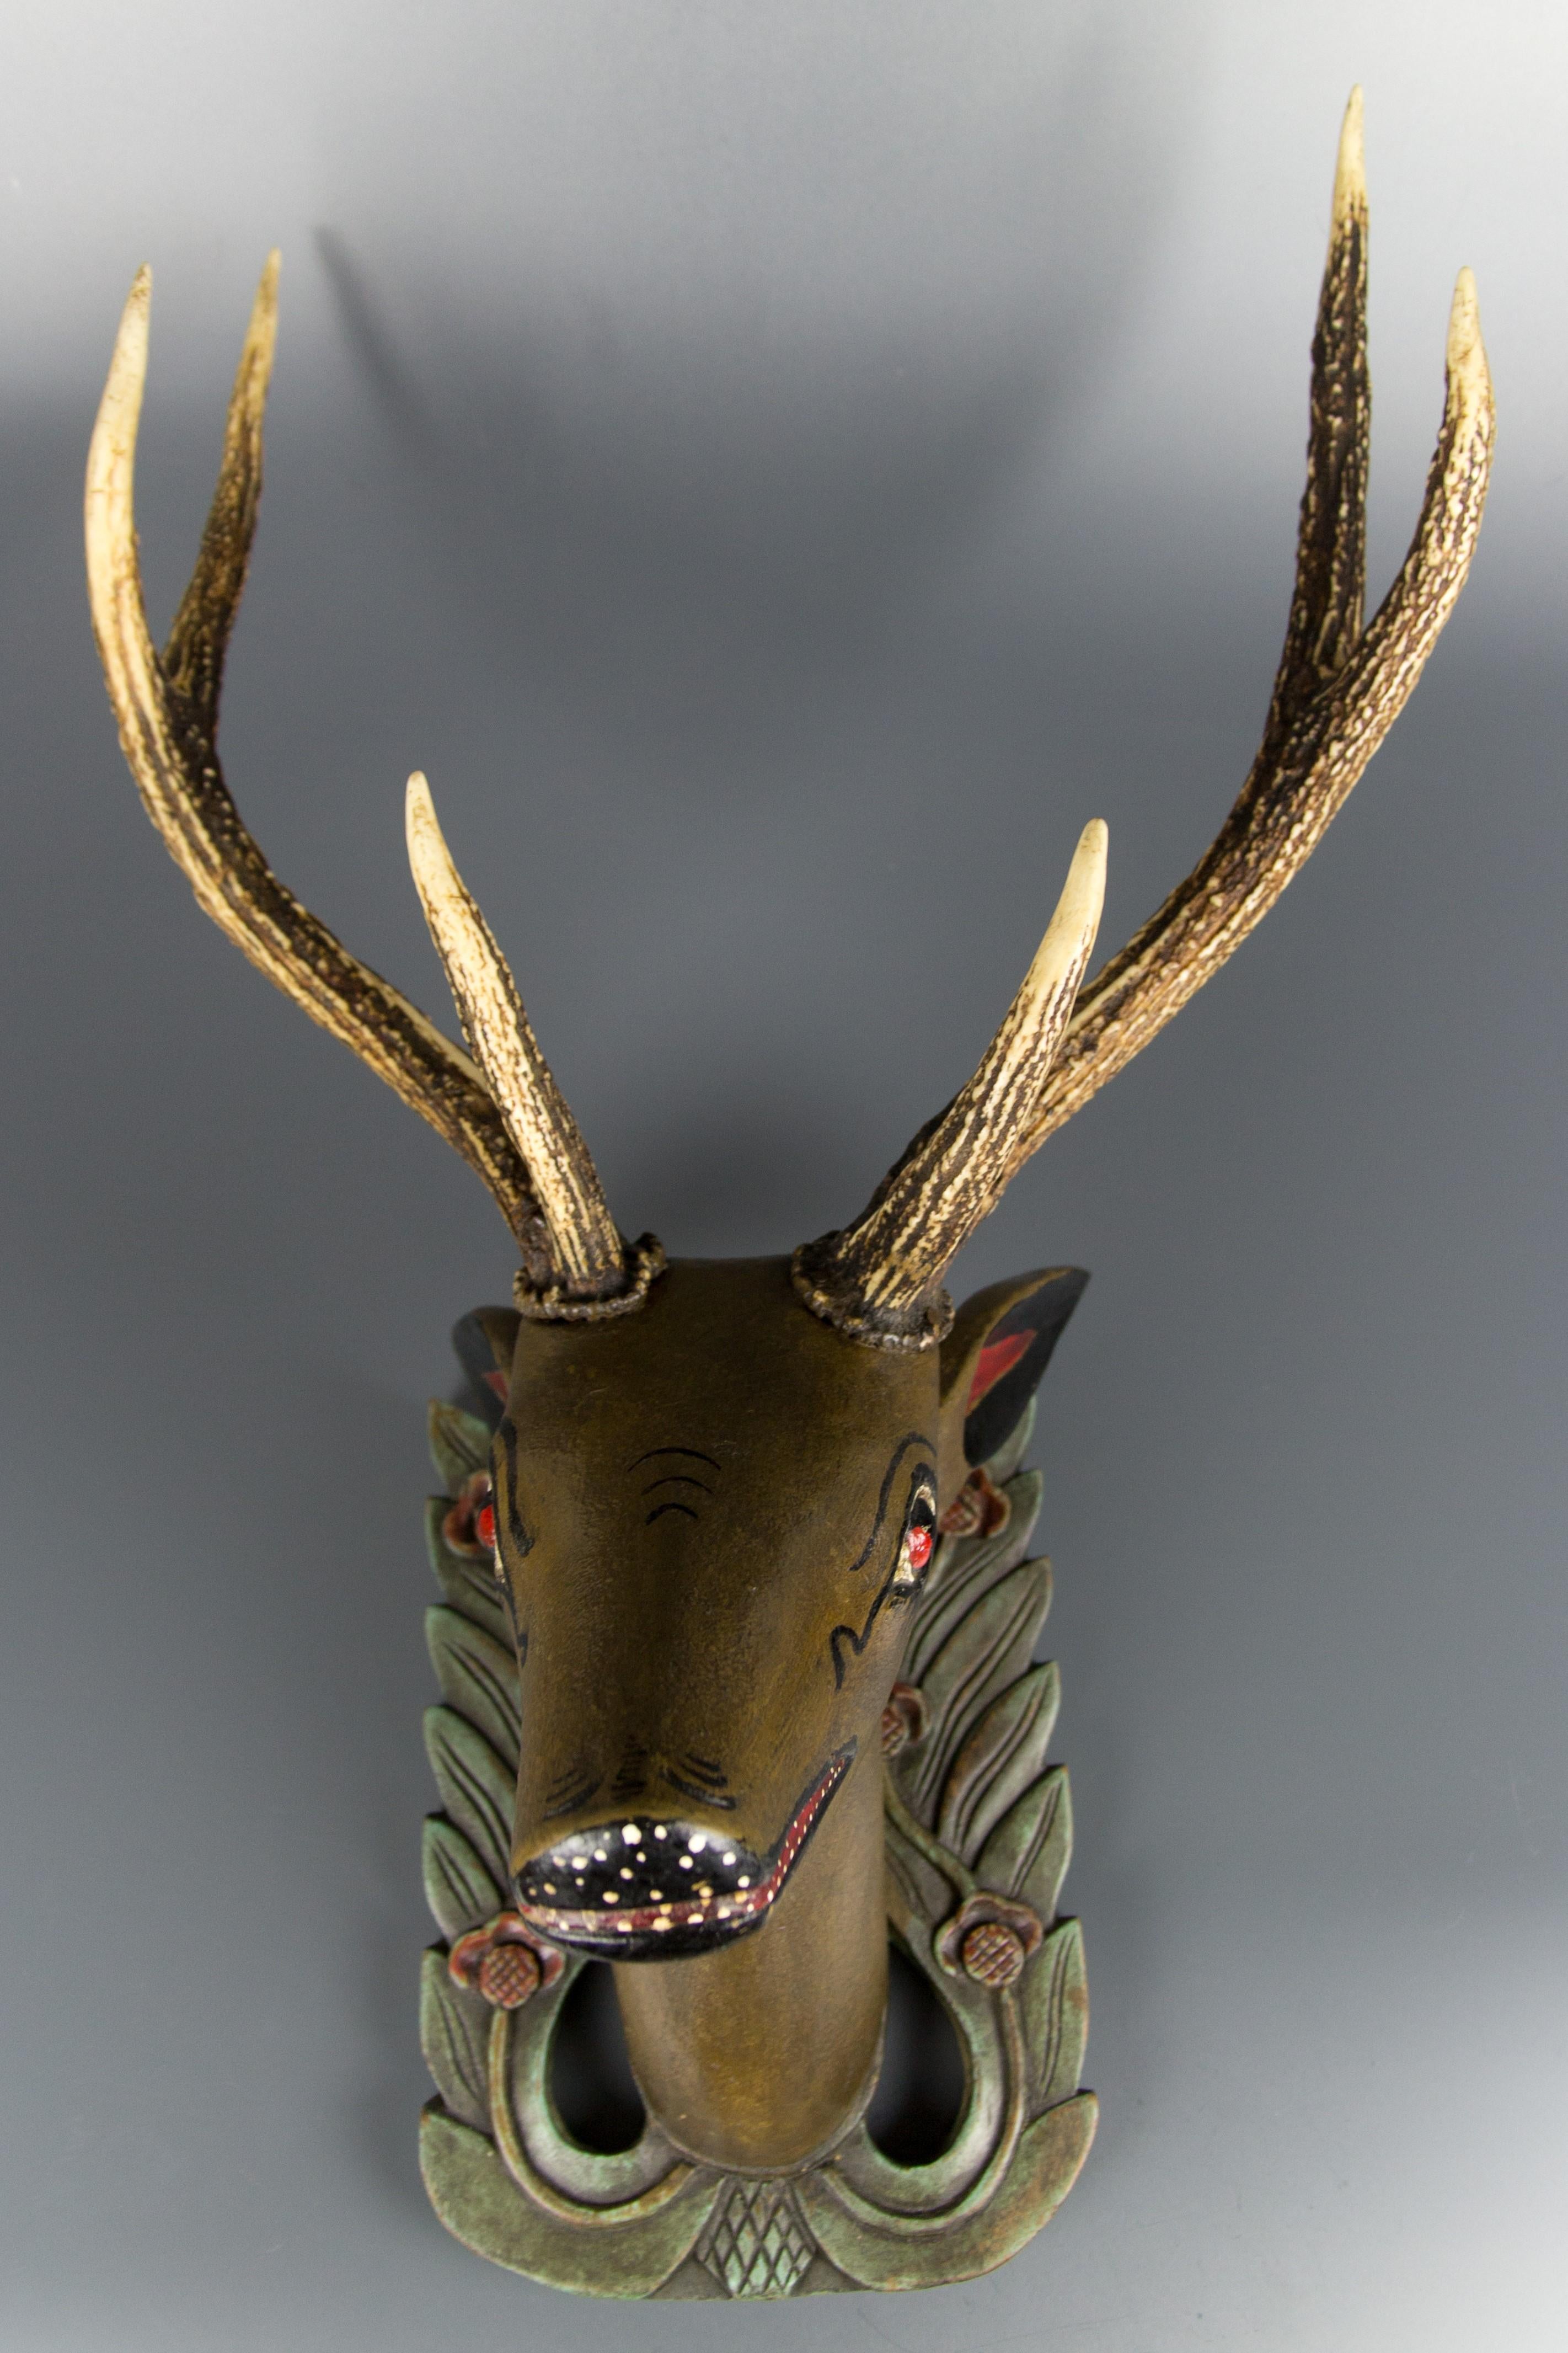 Very unusual and adorable hand carved and hand painted wall hanging deer head with genuine antlers mounted on a carved wooden plaque. The wooden plaque depicts green leaves and red flowers in the Art Nouveau style. The antlers are attached with